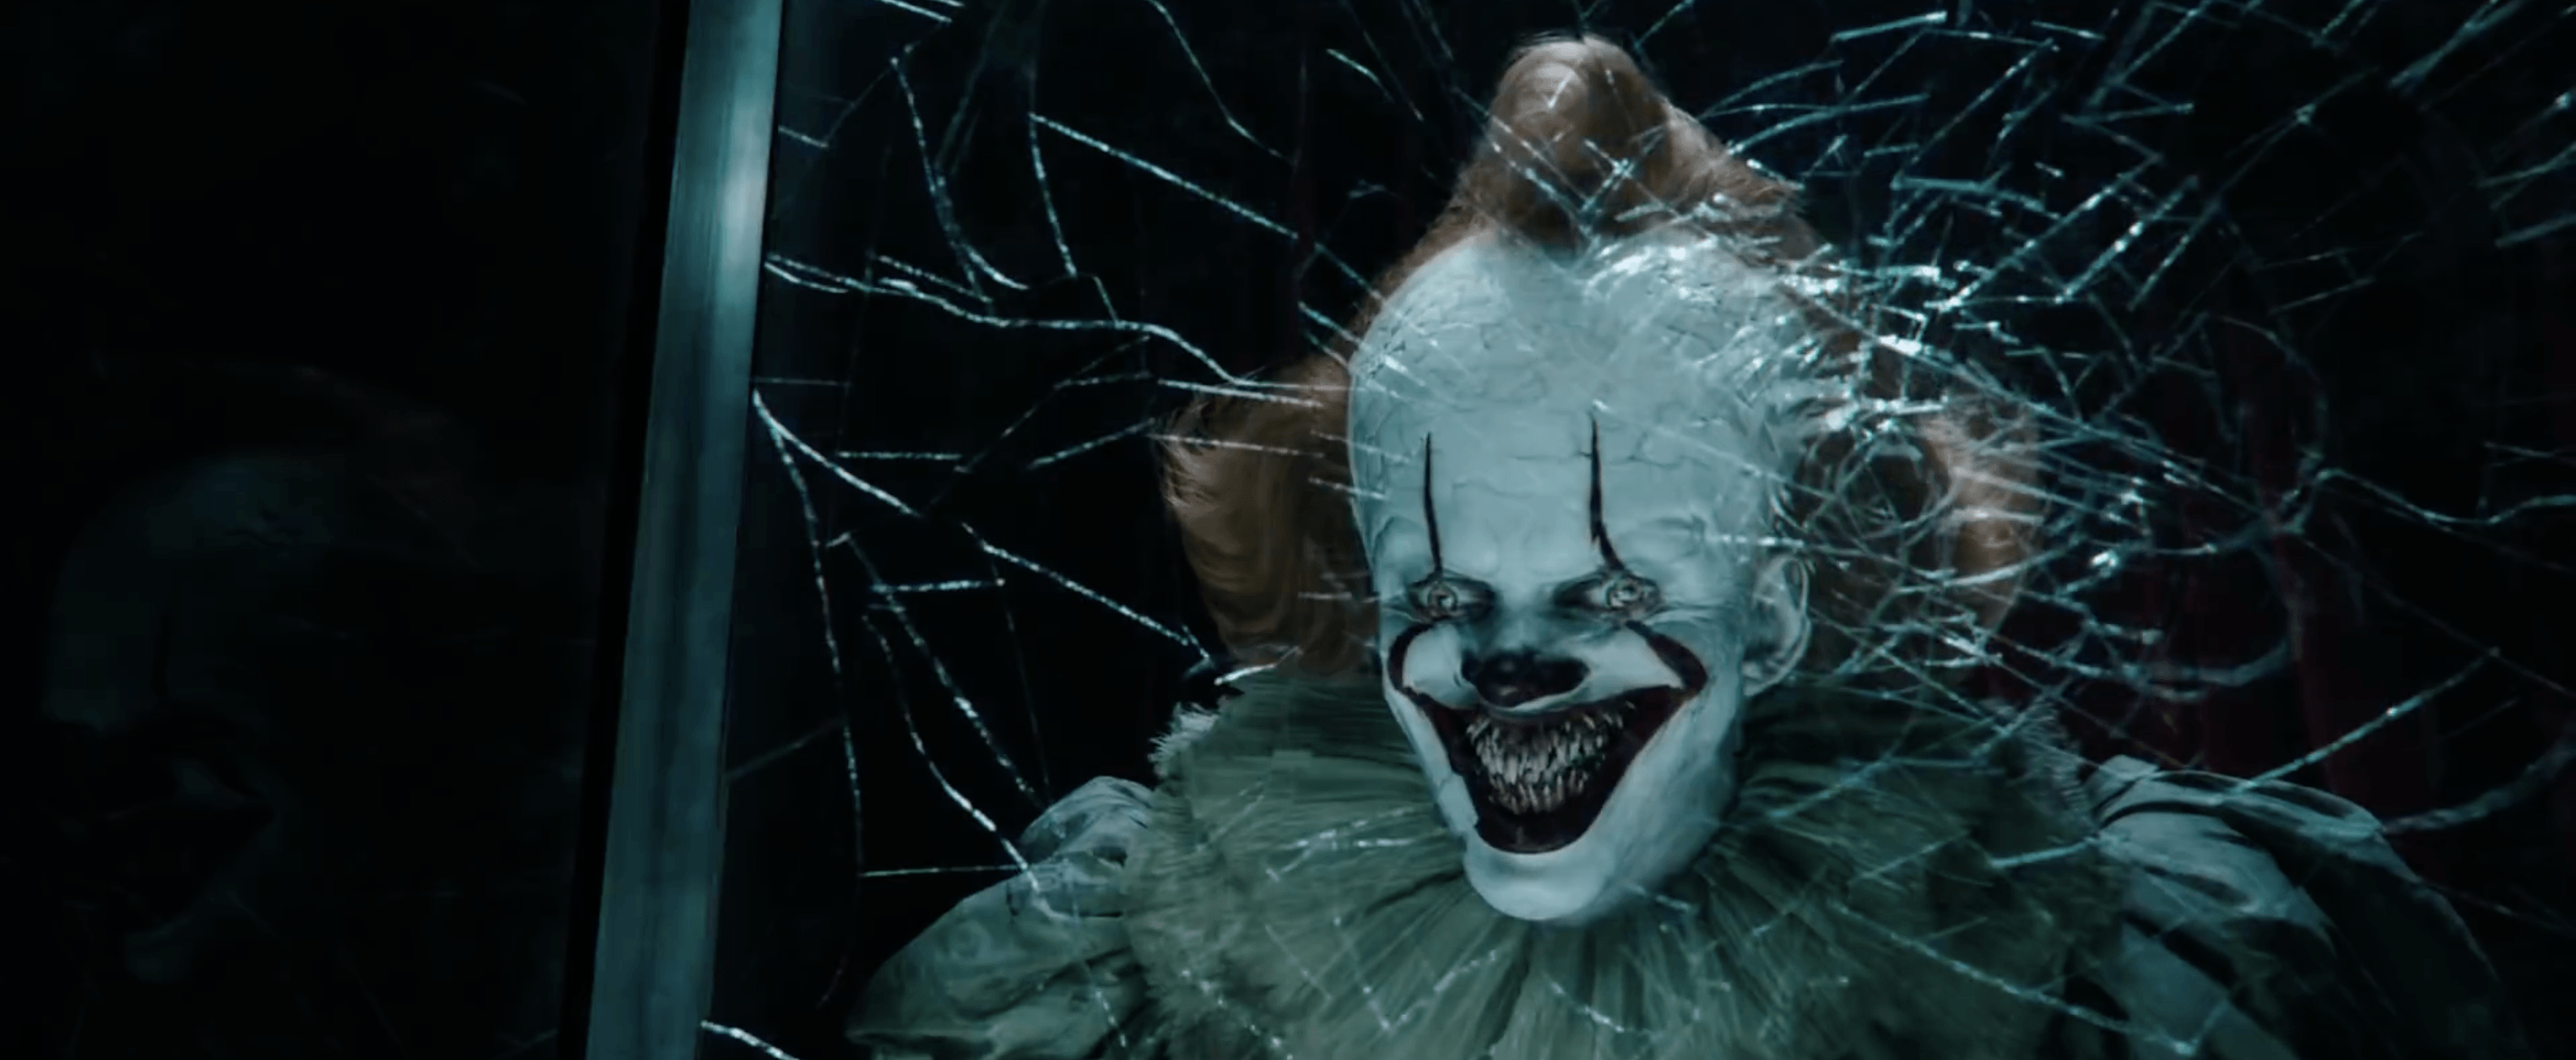 It Chapter 2 Trailer Features Key Scenes Teased At Comic Con